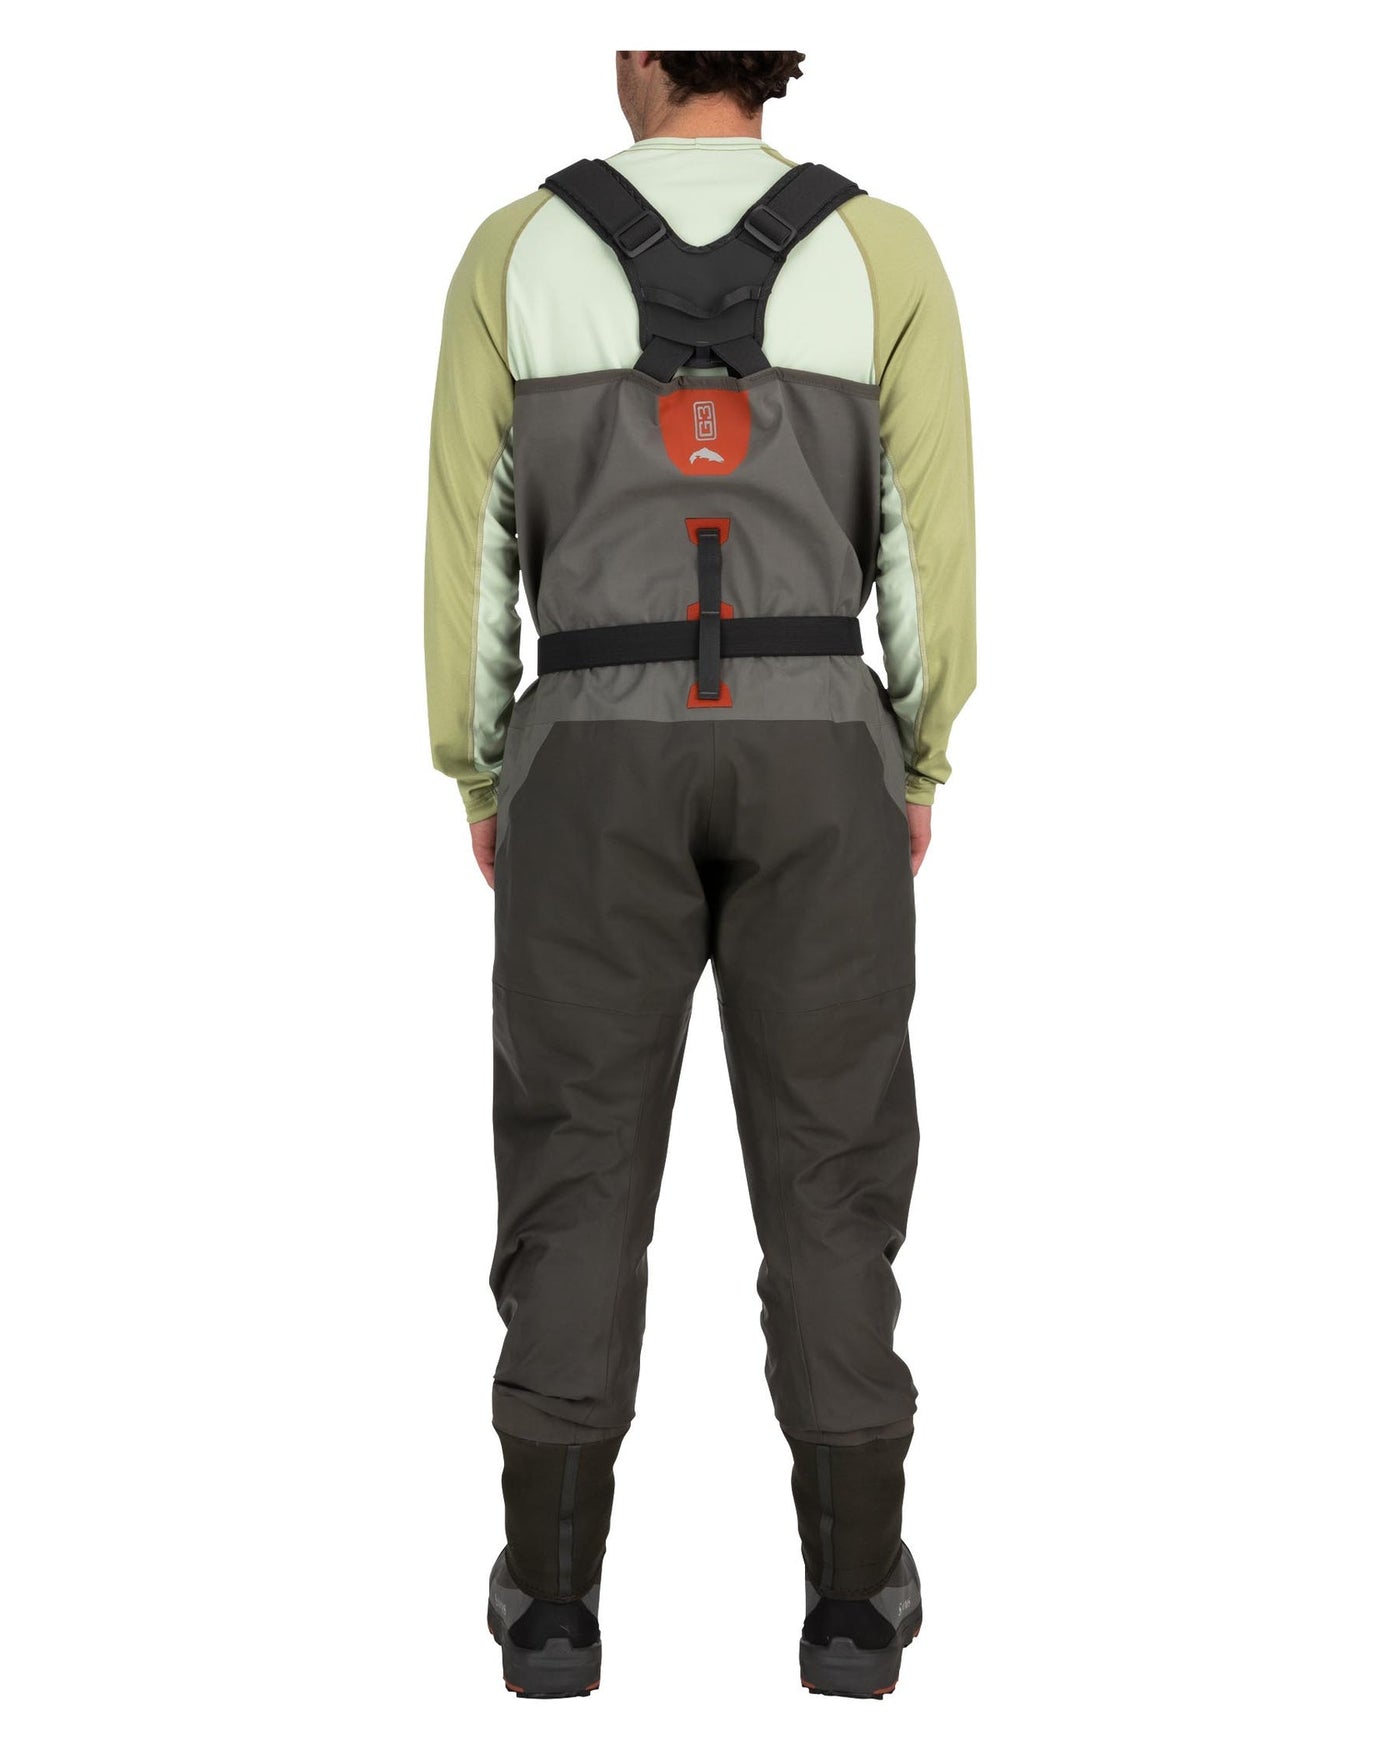 Simms G3 Guide Stockingfoot Chest Waders